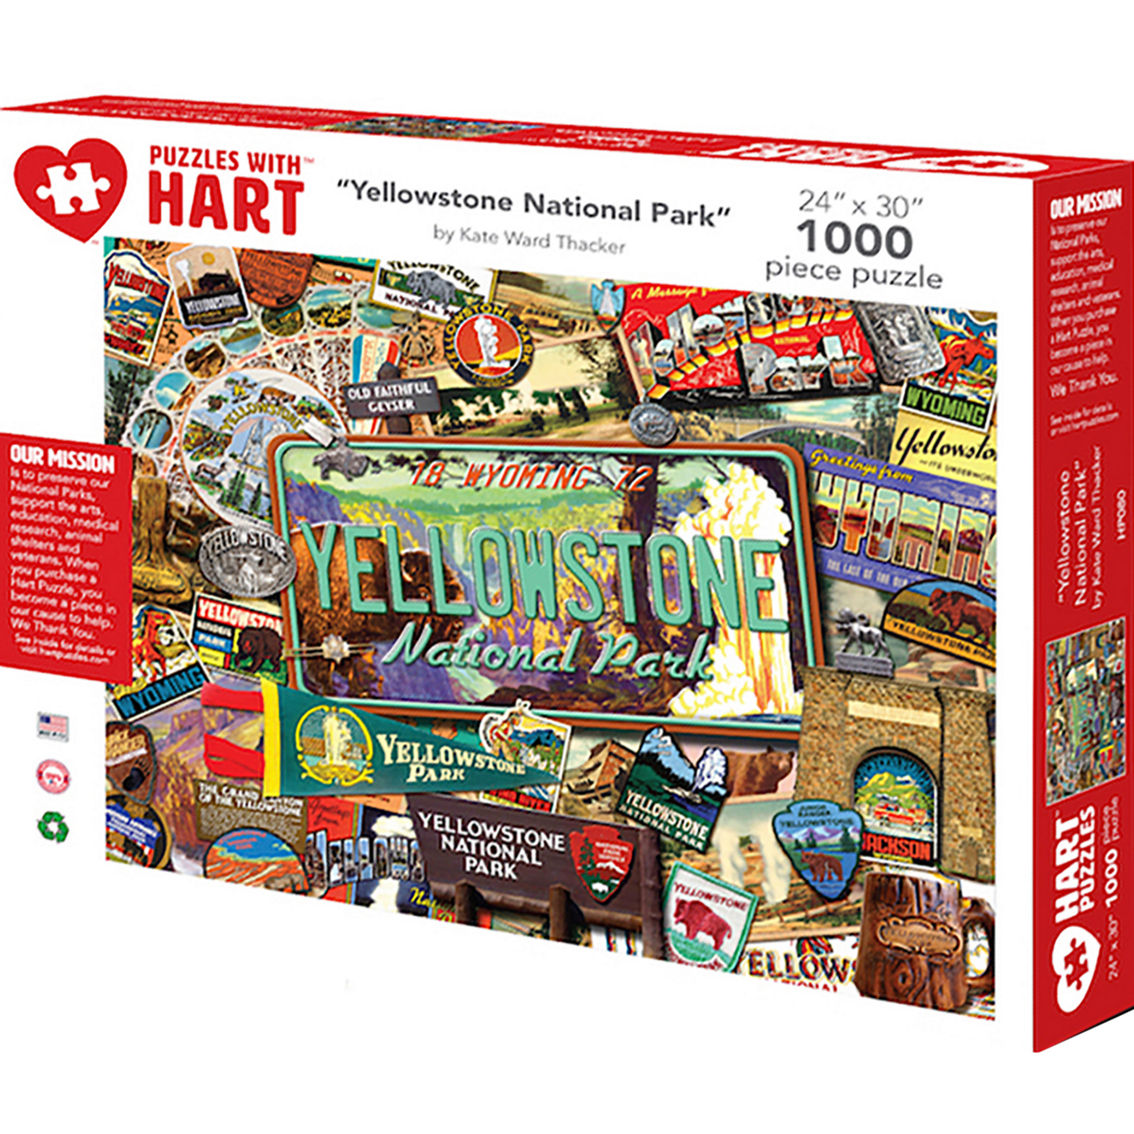 Hart Puzzles Yellowstone National Park 1000 pc. Puzzle - Image 2 of 6